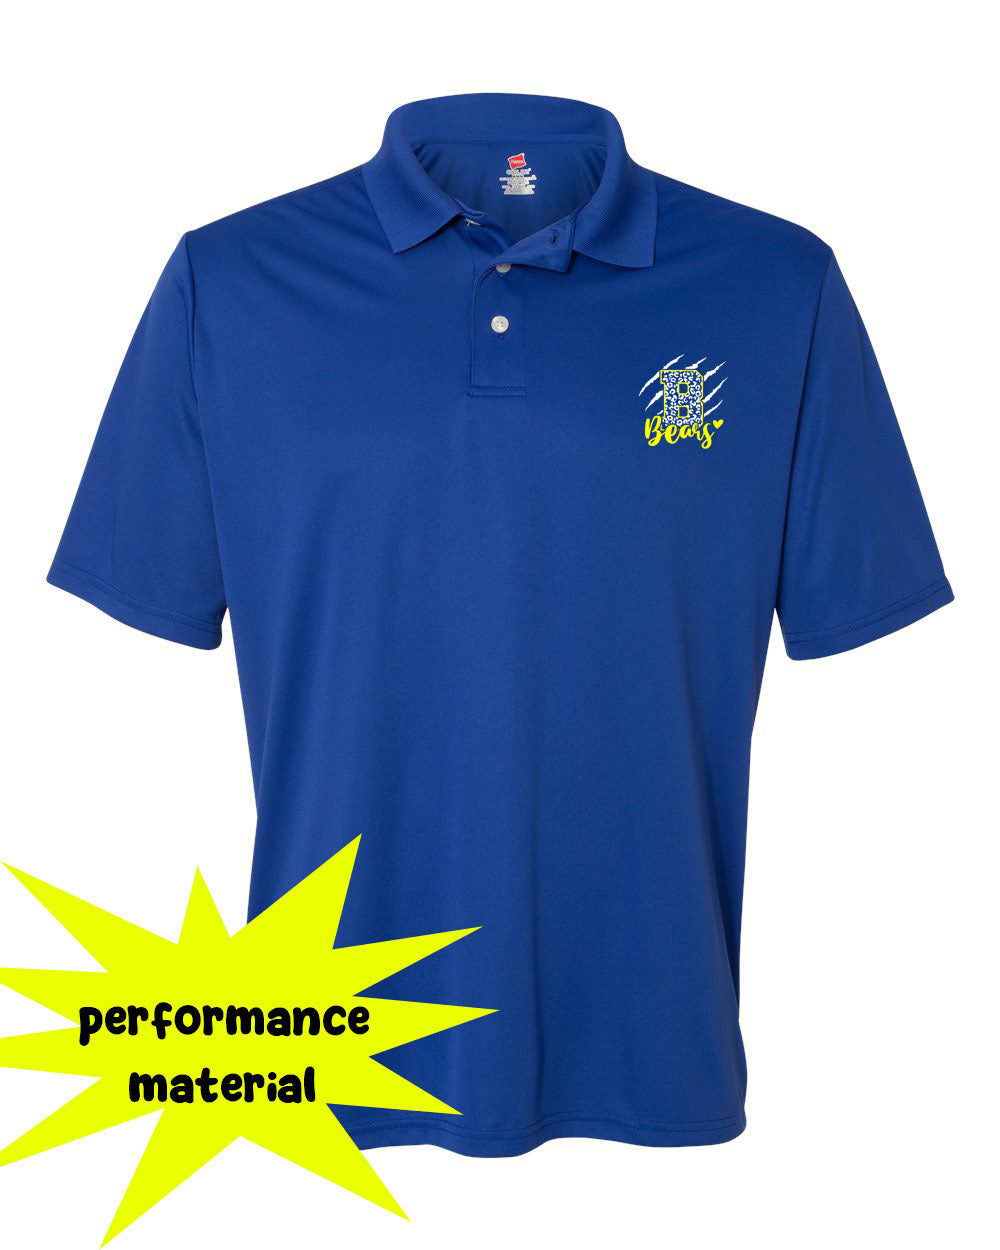 Blairstown Bears Performance Material Polo T-Shirt Design 11